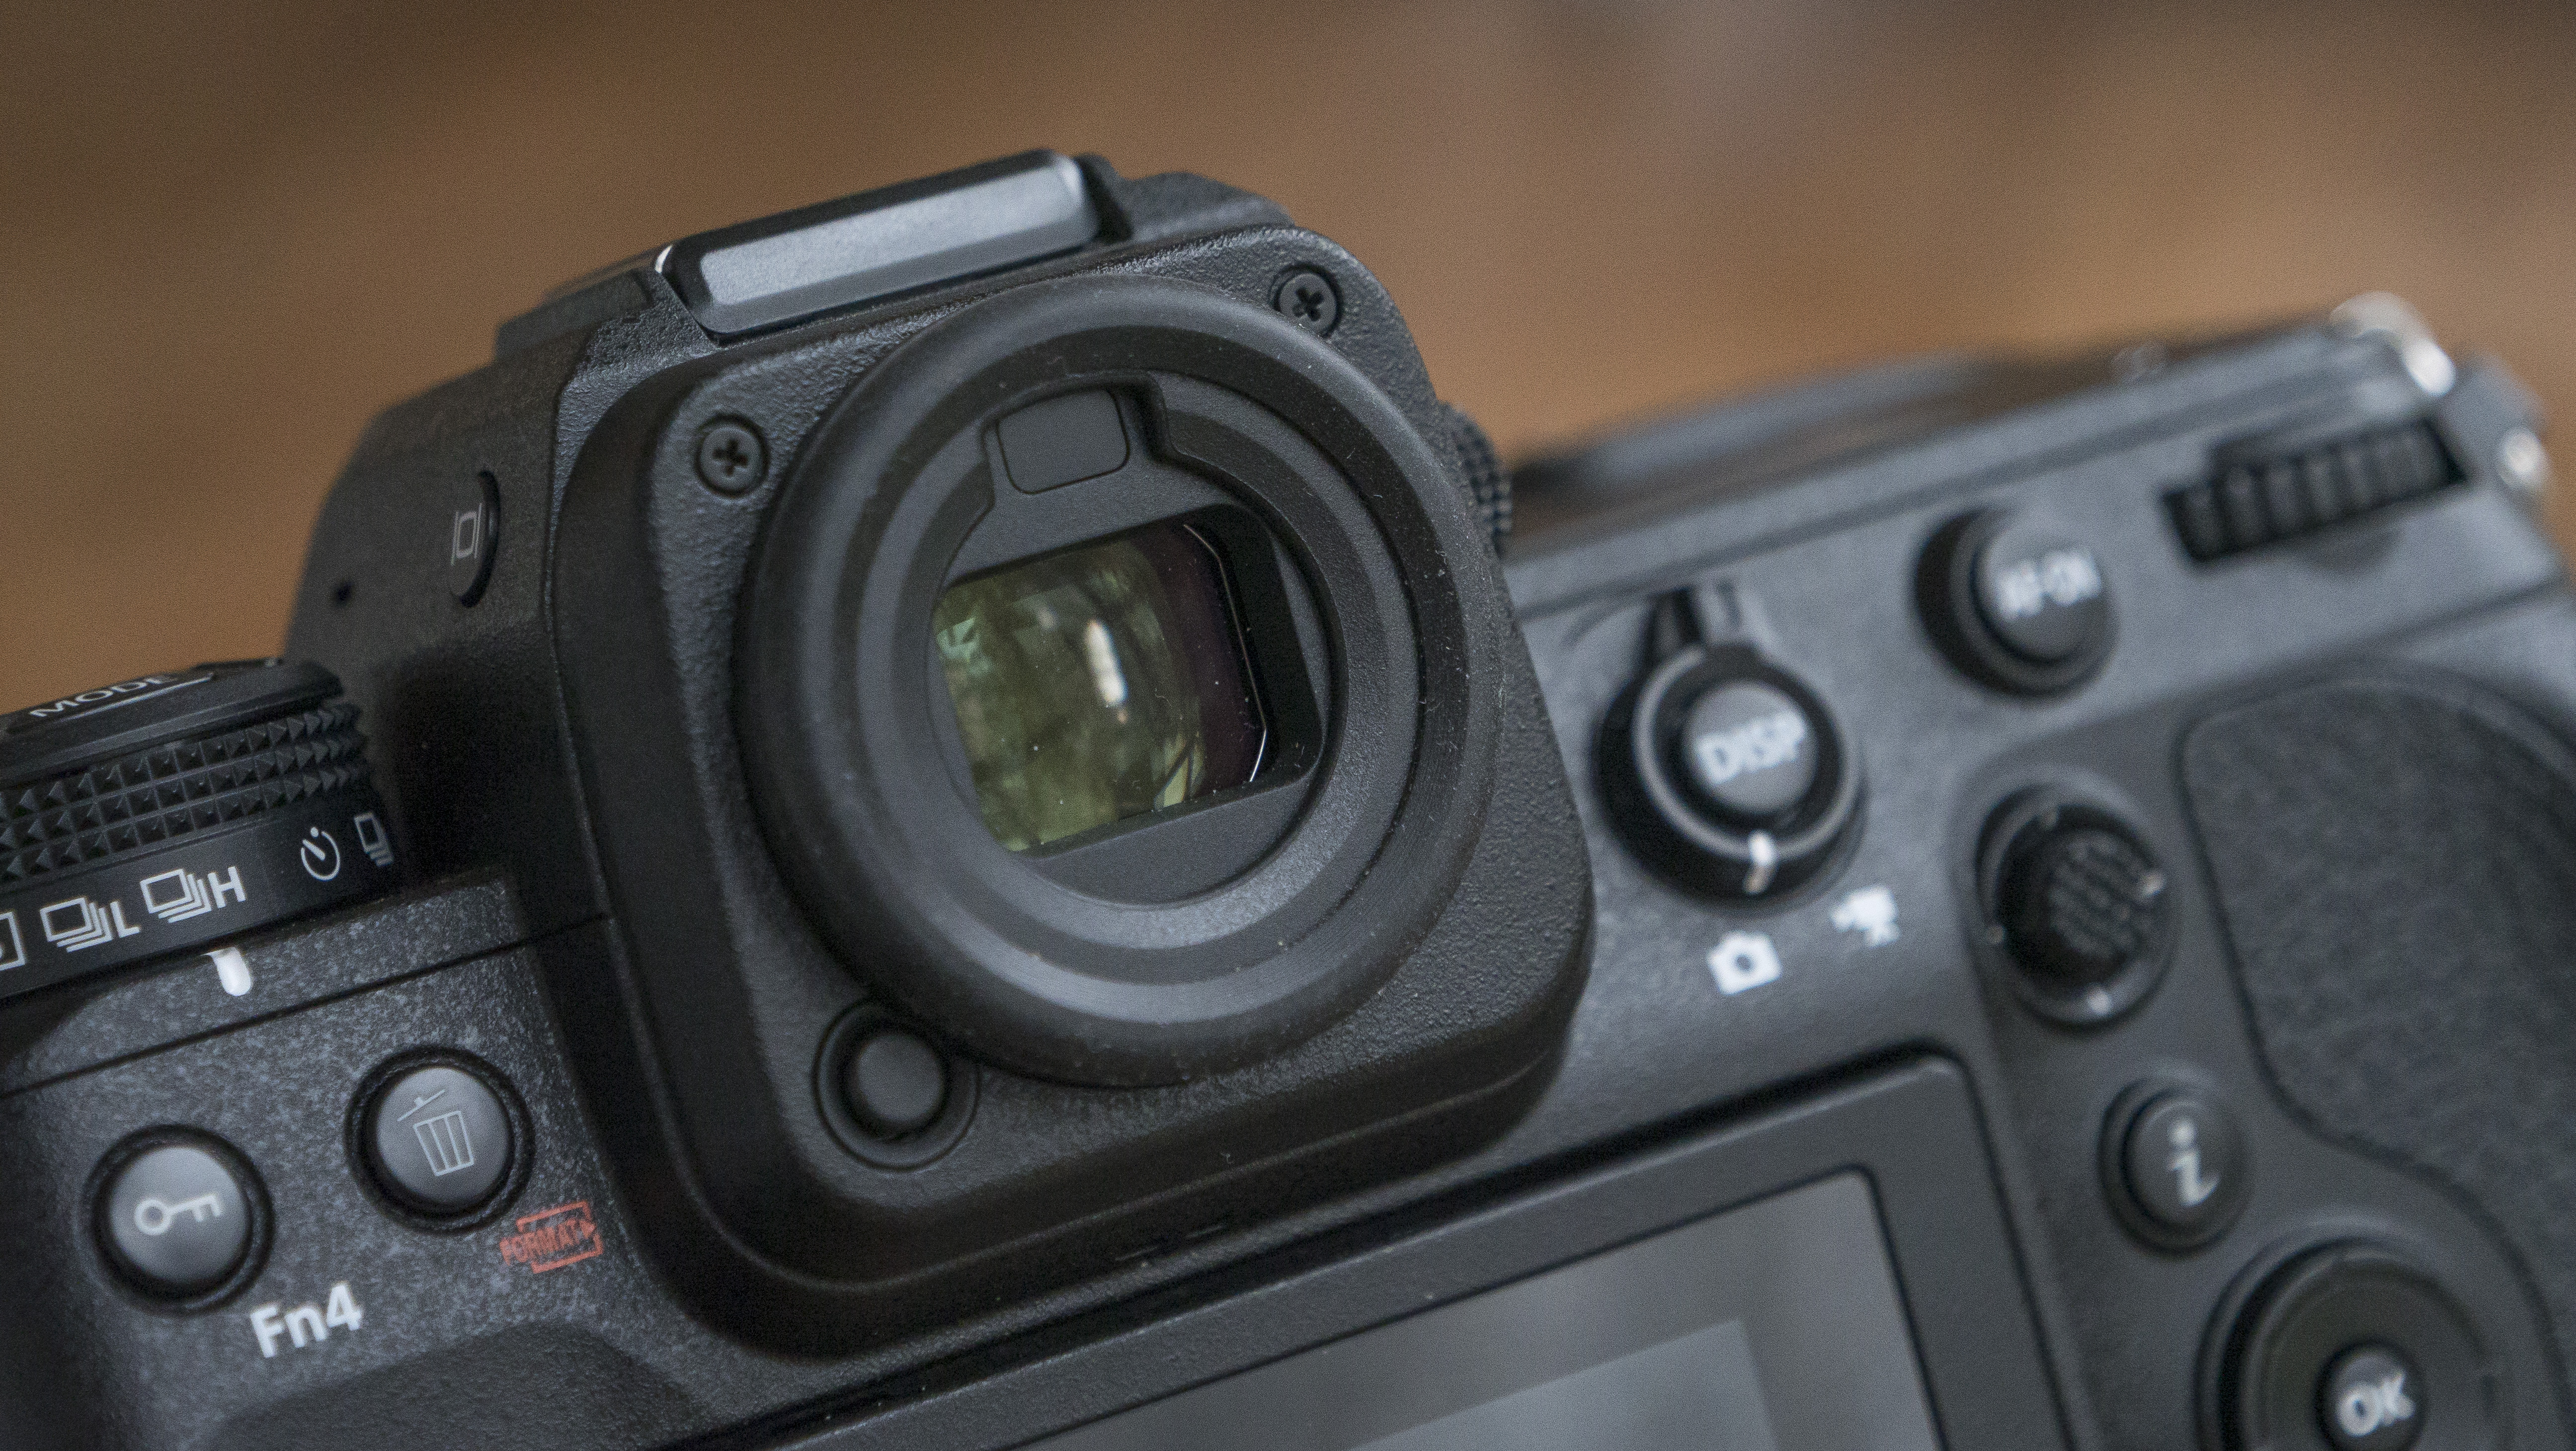 The Nikon Z9 camera's electronic viewfinder